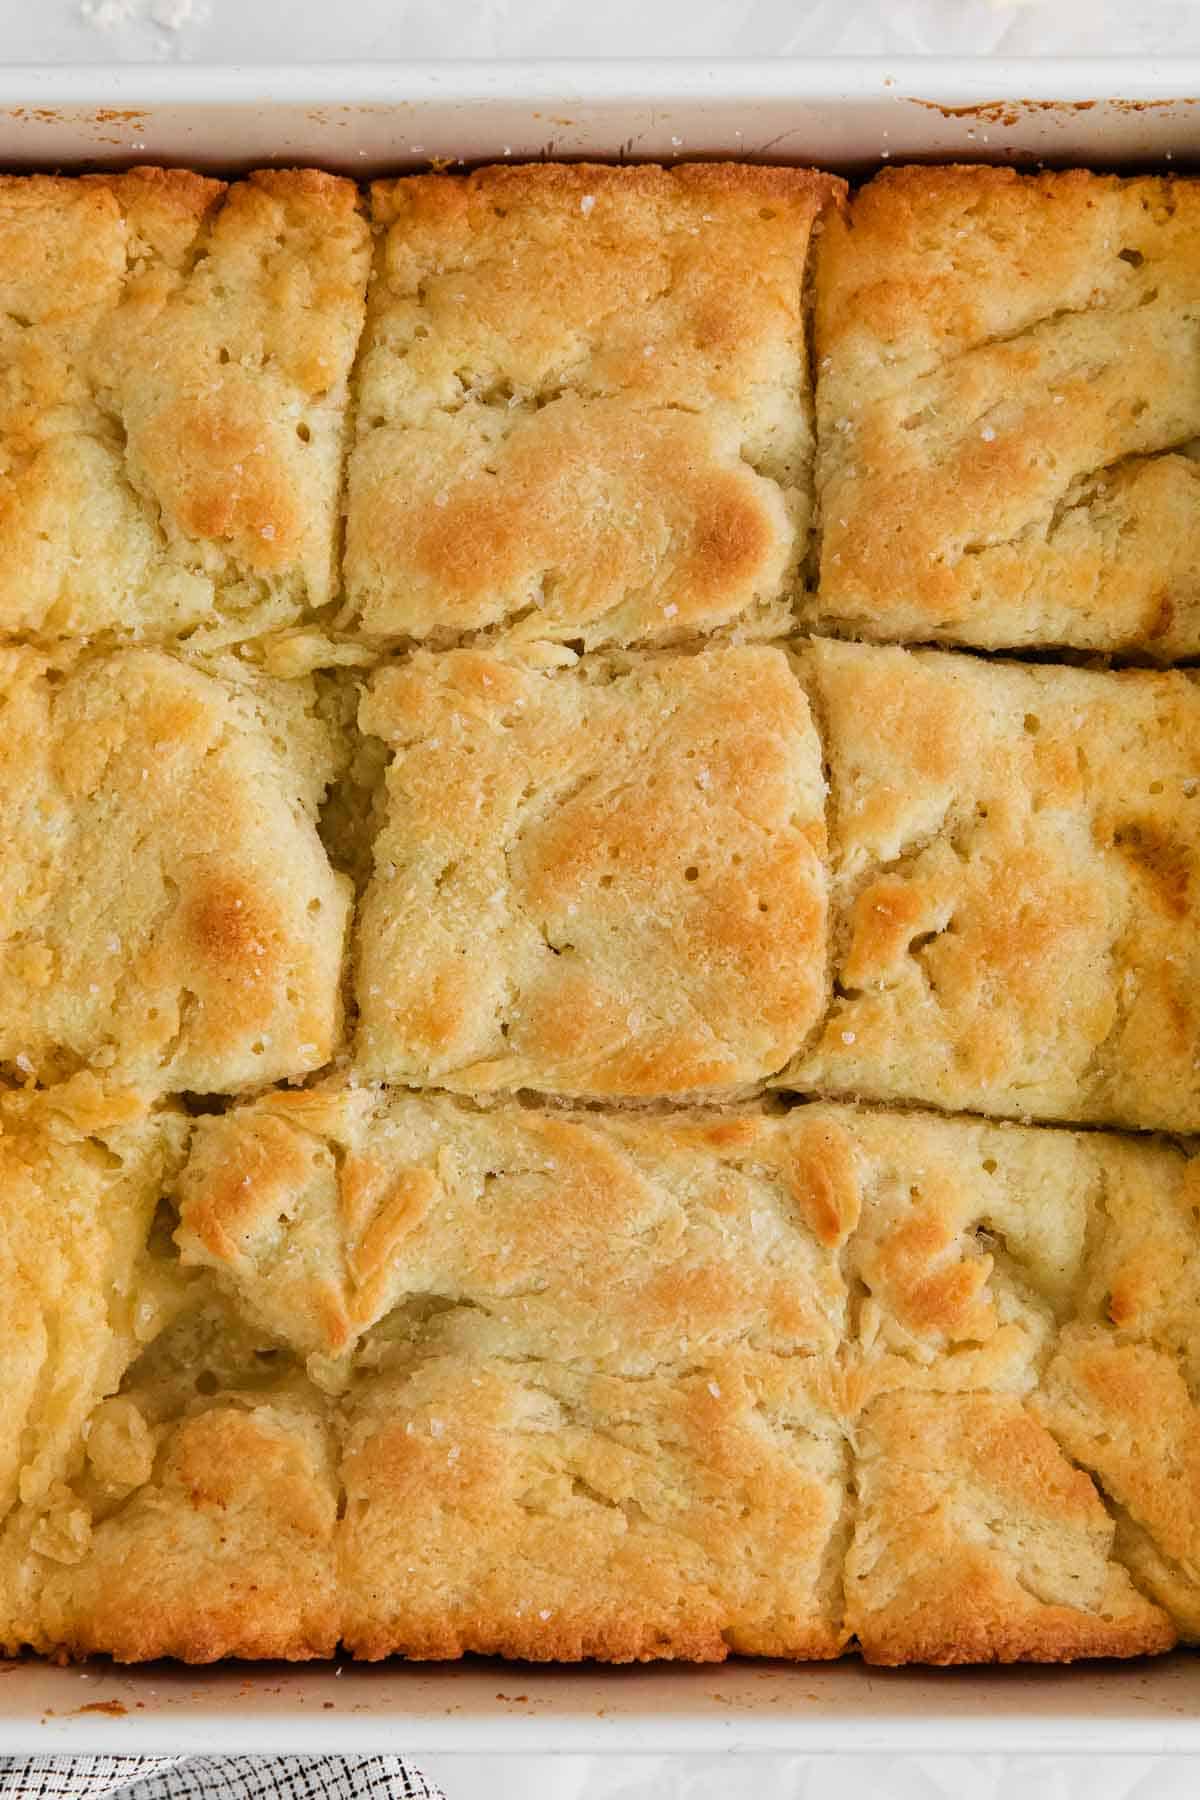 A close-up of gluten-free biscuits in a baking dish